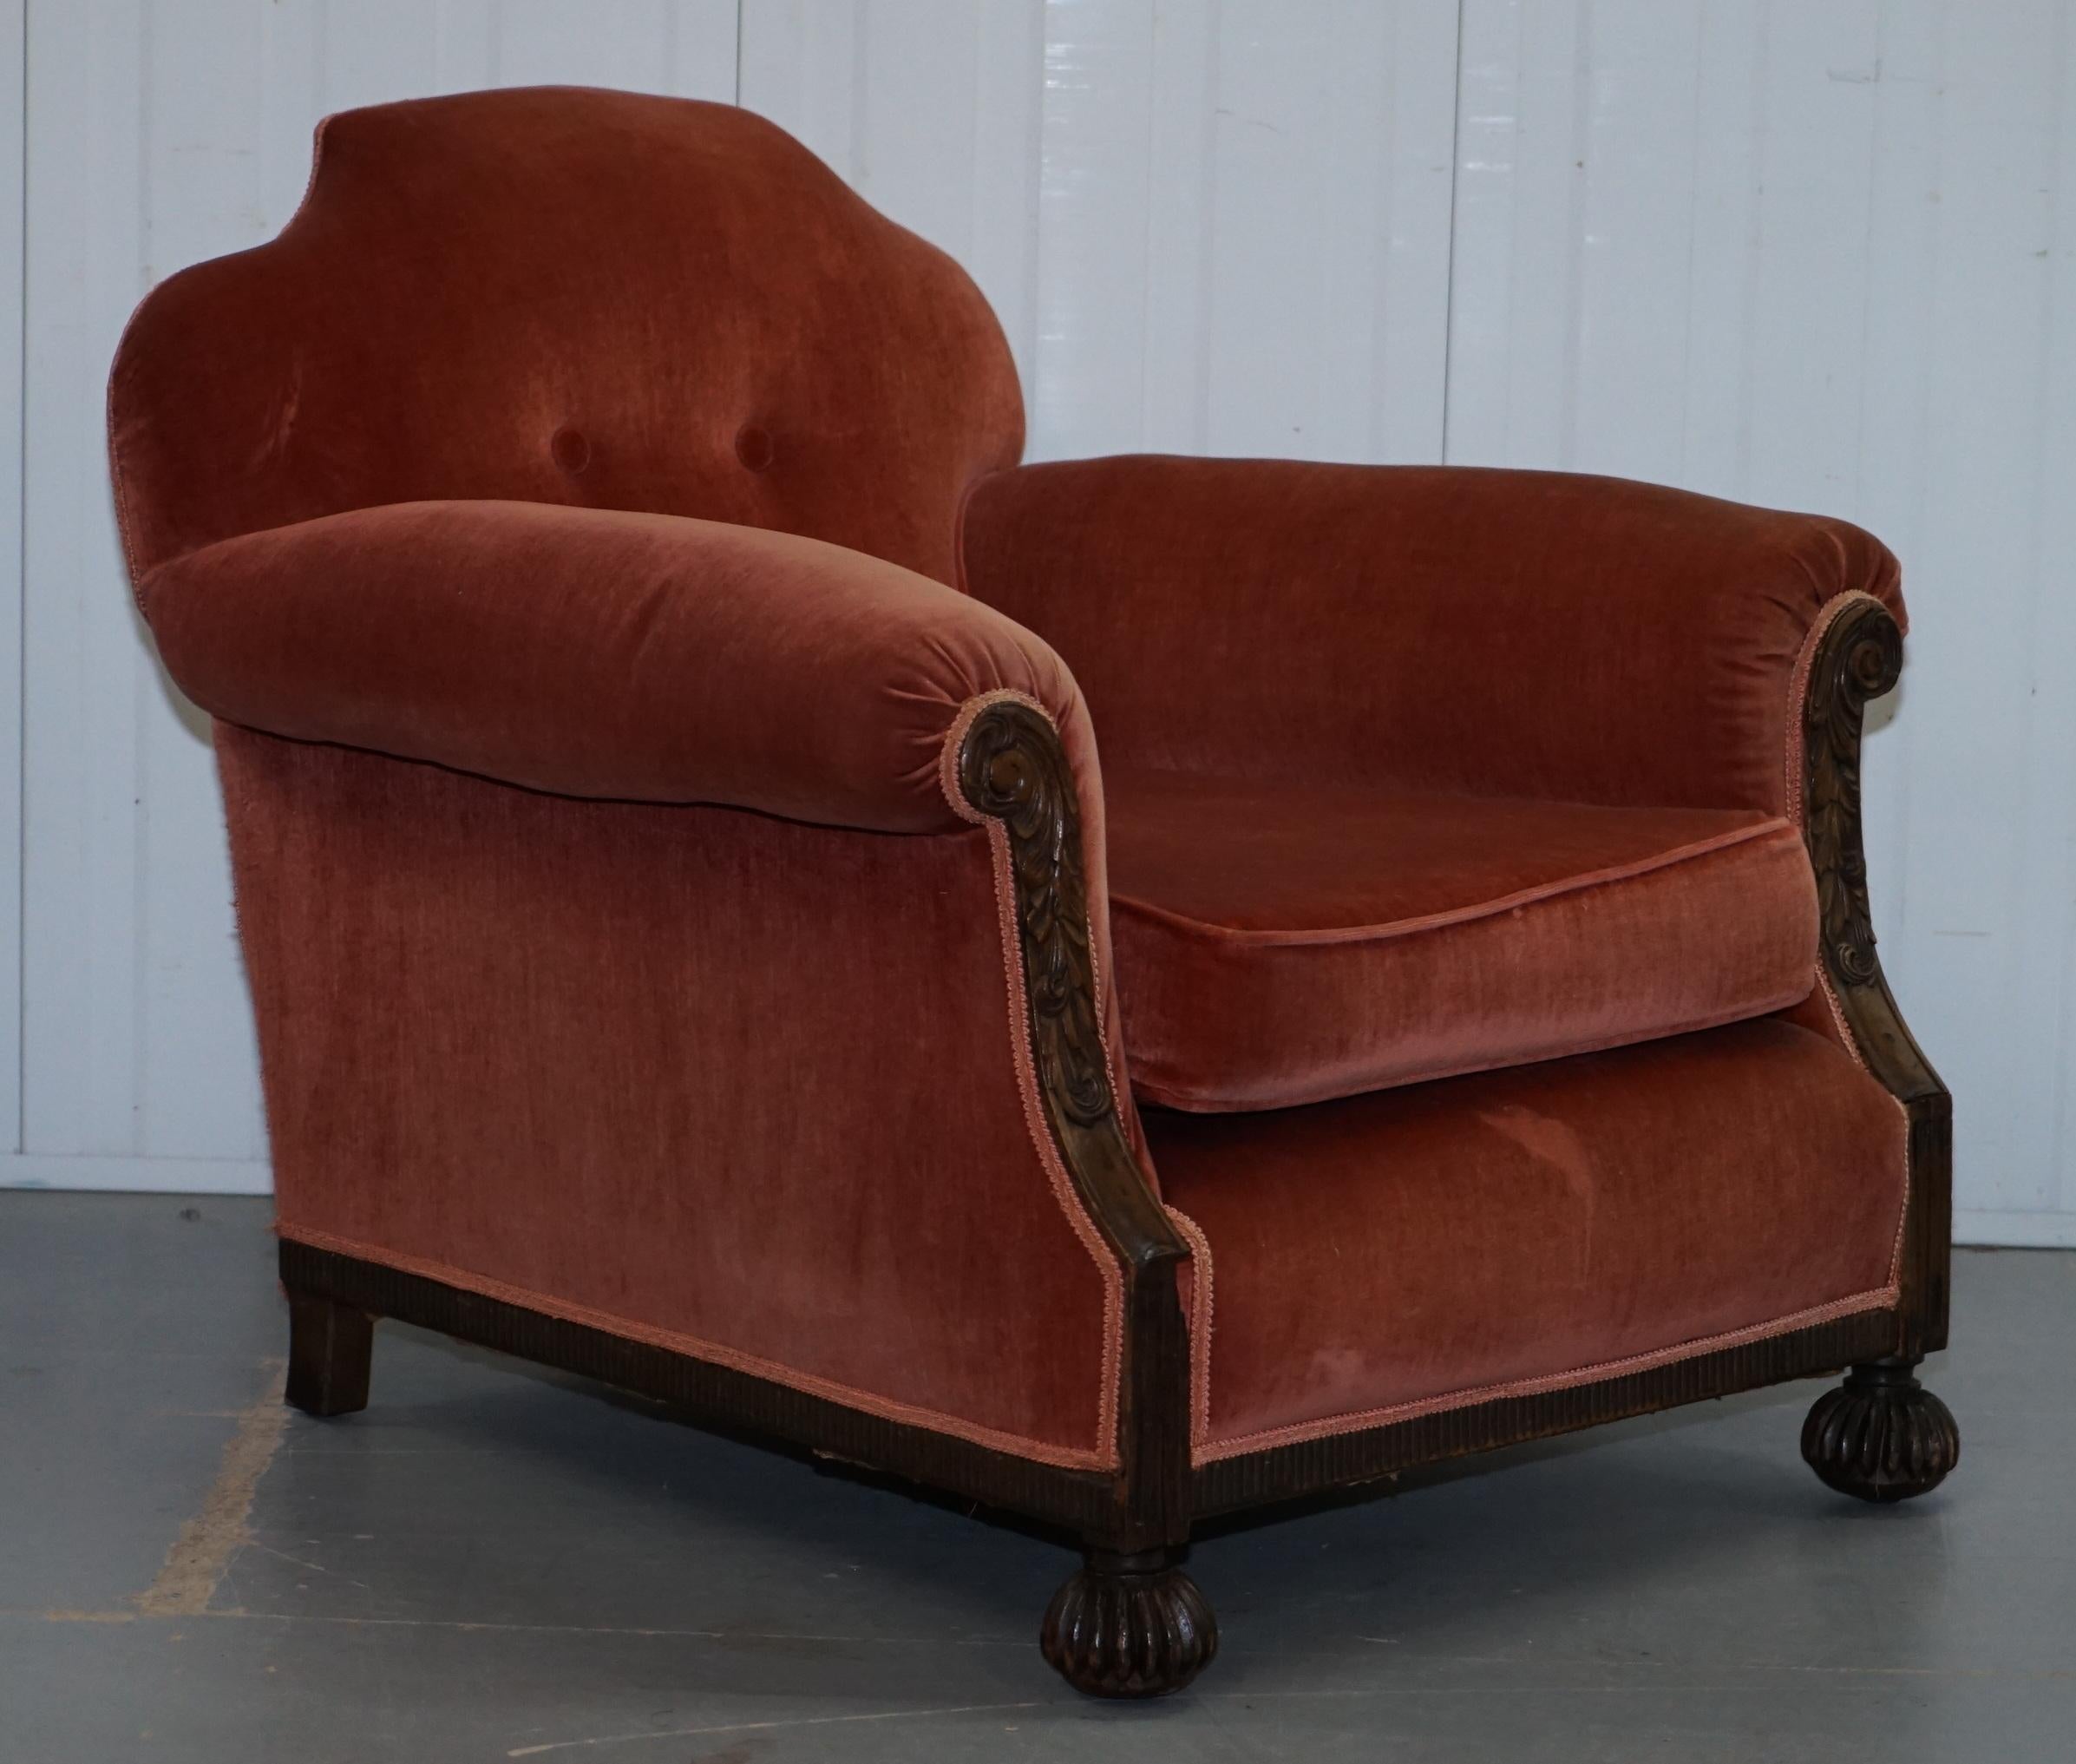 We are delighted to offer for sale this stunning original Victorian three piece suite in plush velour upholstery

A very good looking and well made suite, if you could find someone with the skill to make a suite to this standard today you would be